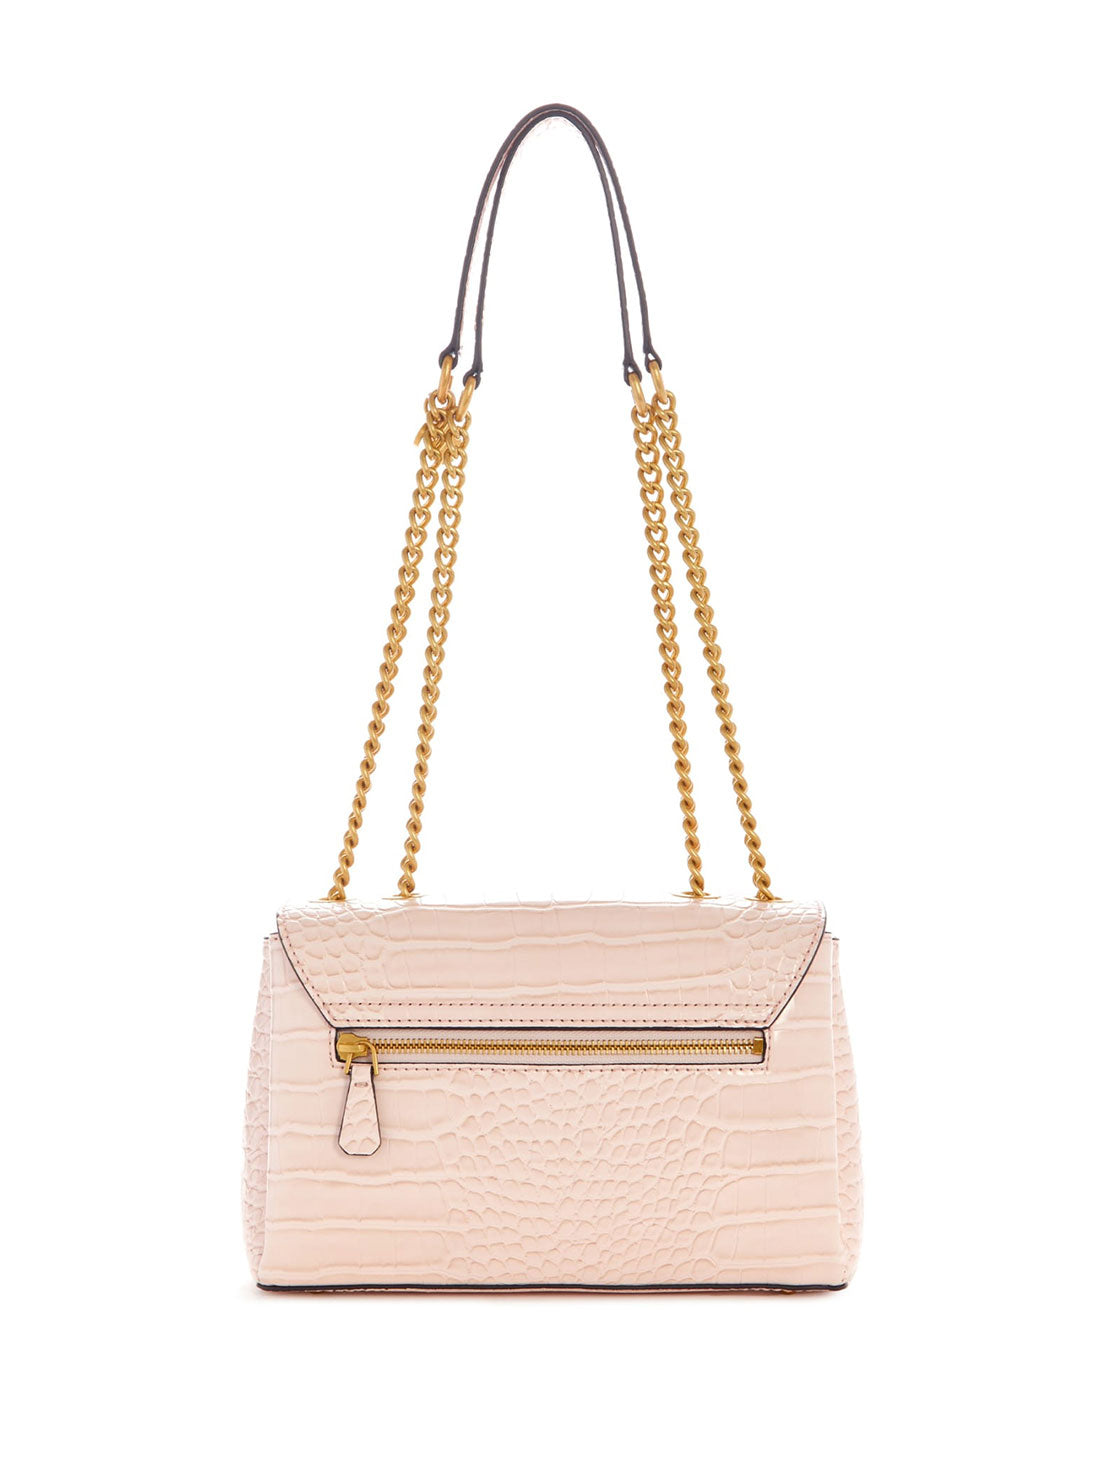 GUESS Women's Pale Rose Montreal Crossbody Bag CX875621 Back View